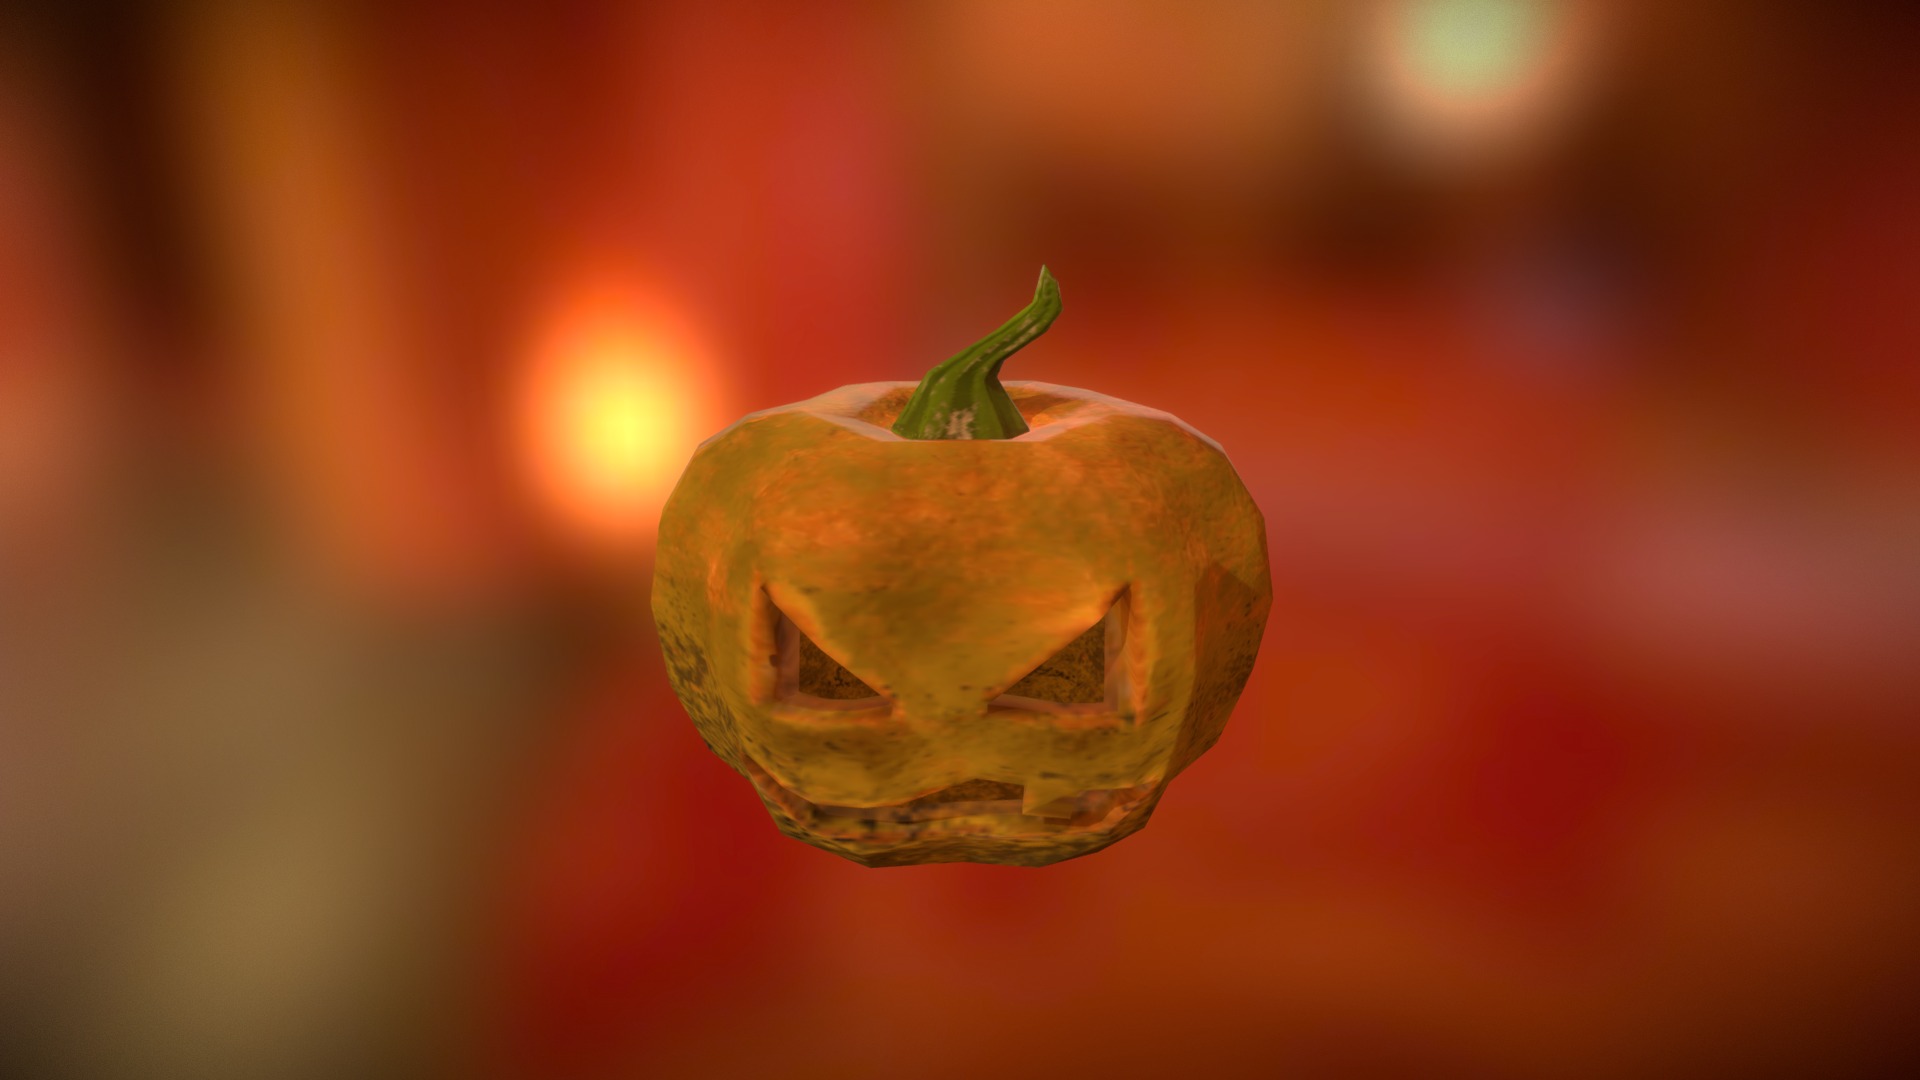 3D model Pumpkin - This is a 3D model of the Pumpkin. The 3D model is about a glass with a green stem.